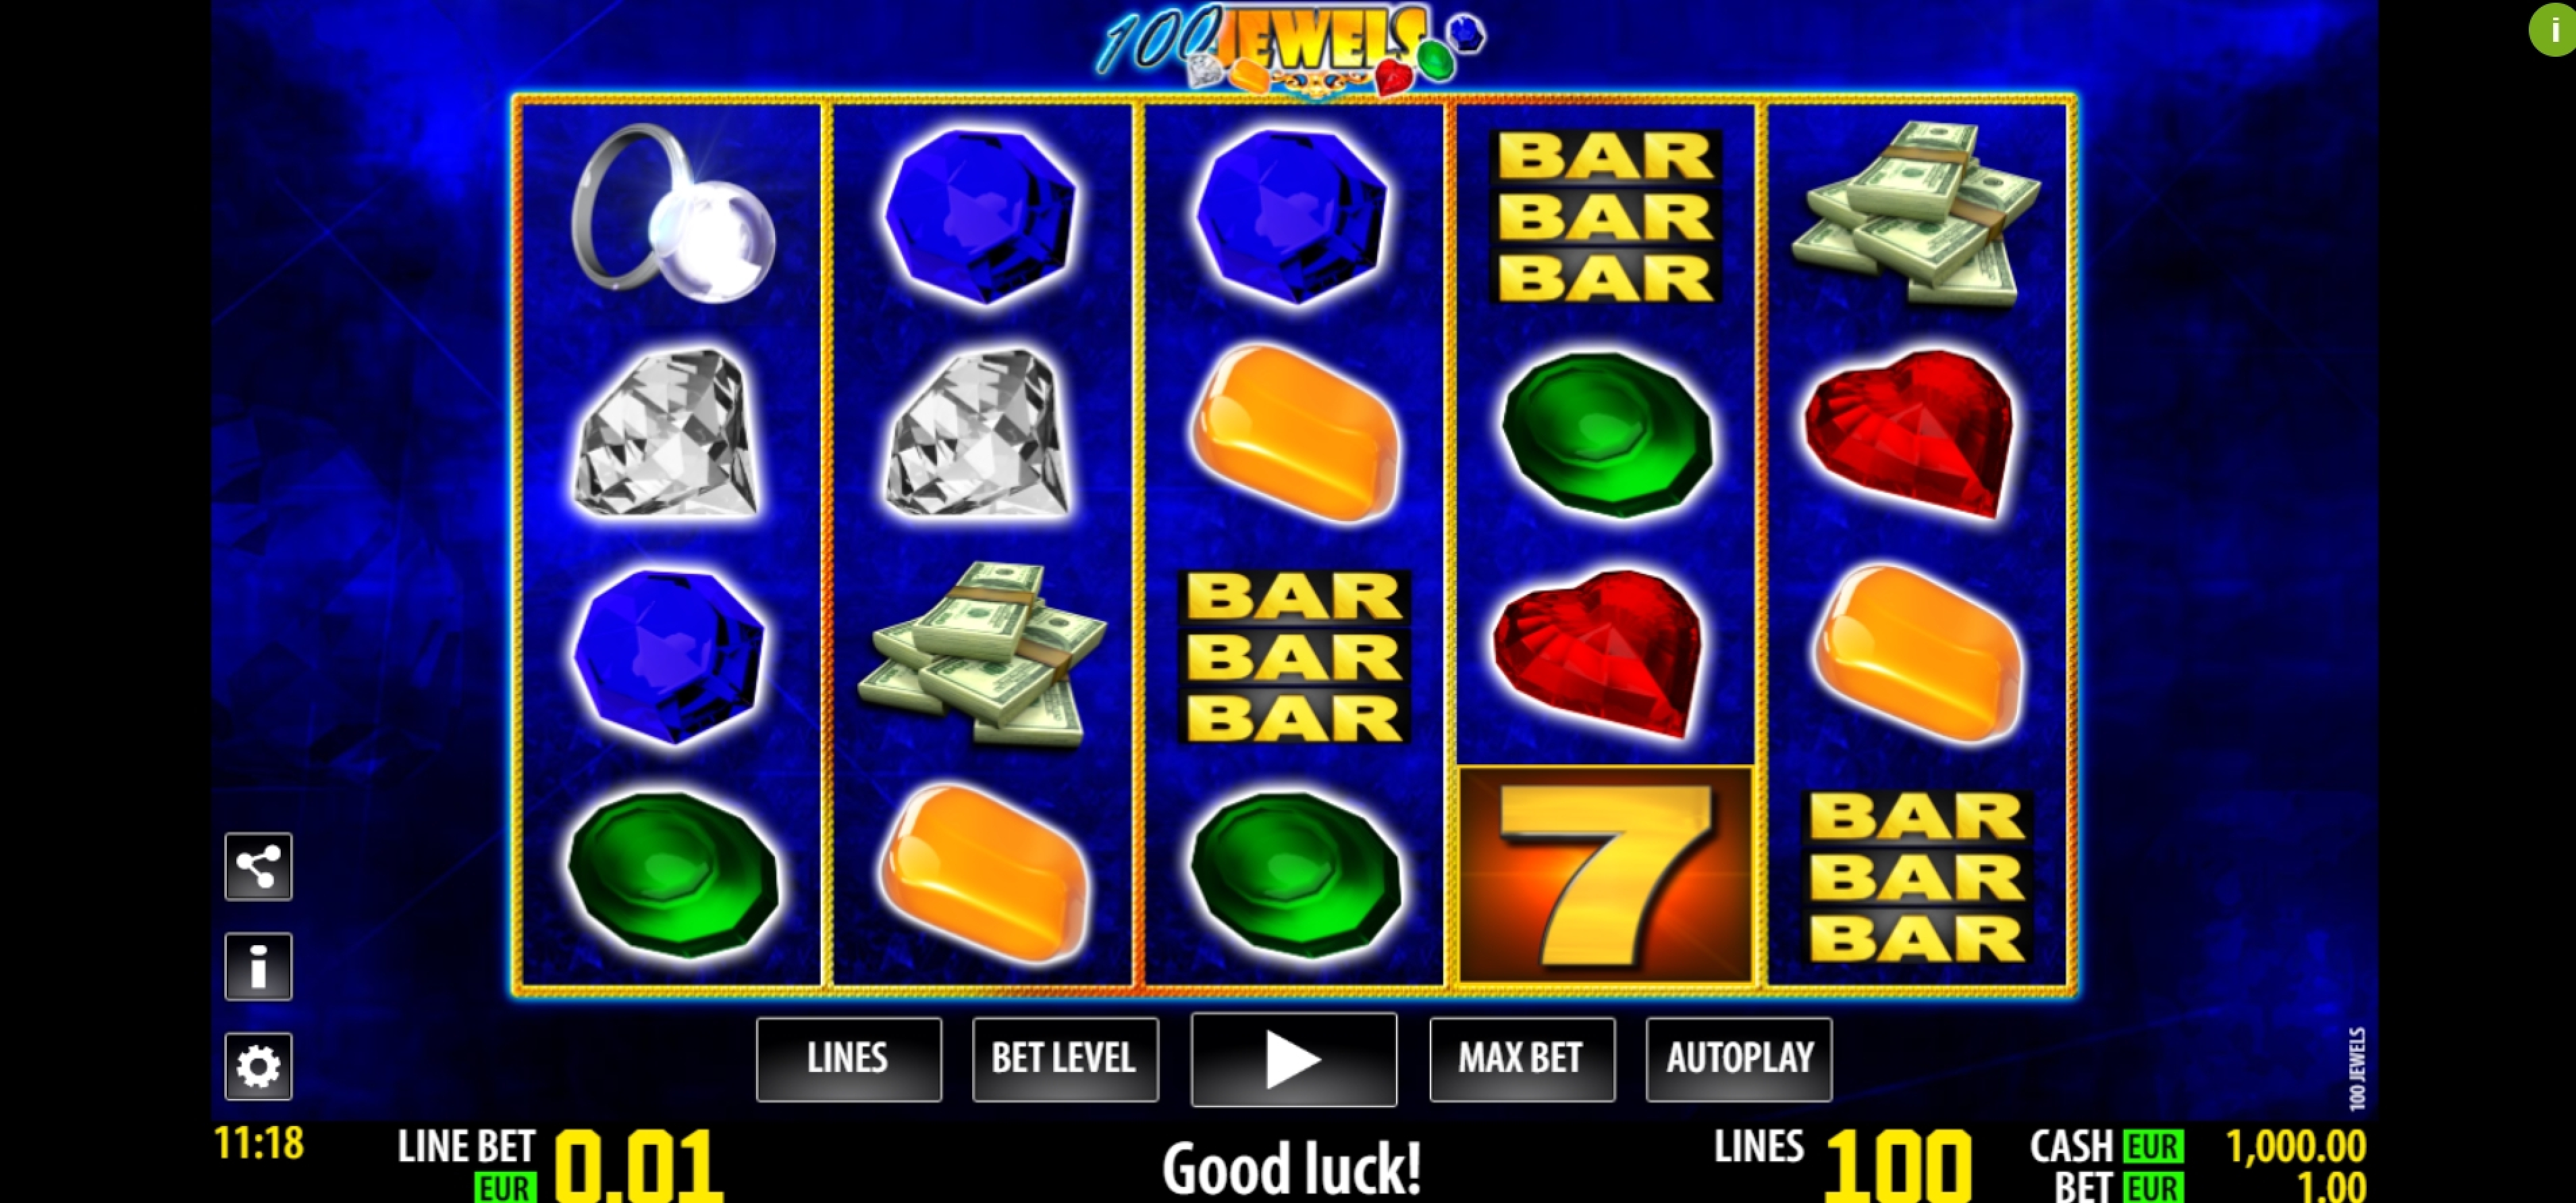 Reels in 100 Jewels Slot Game by Nazionale Elettronica